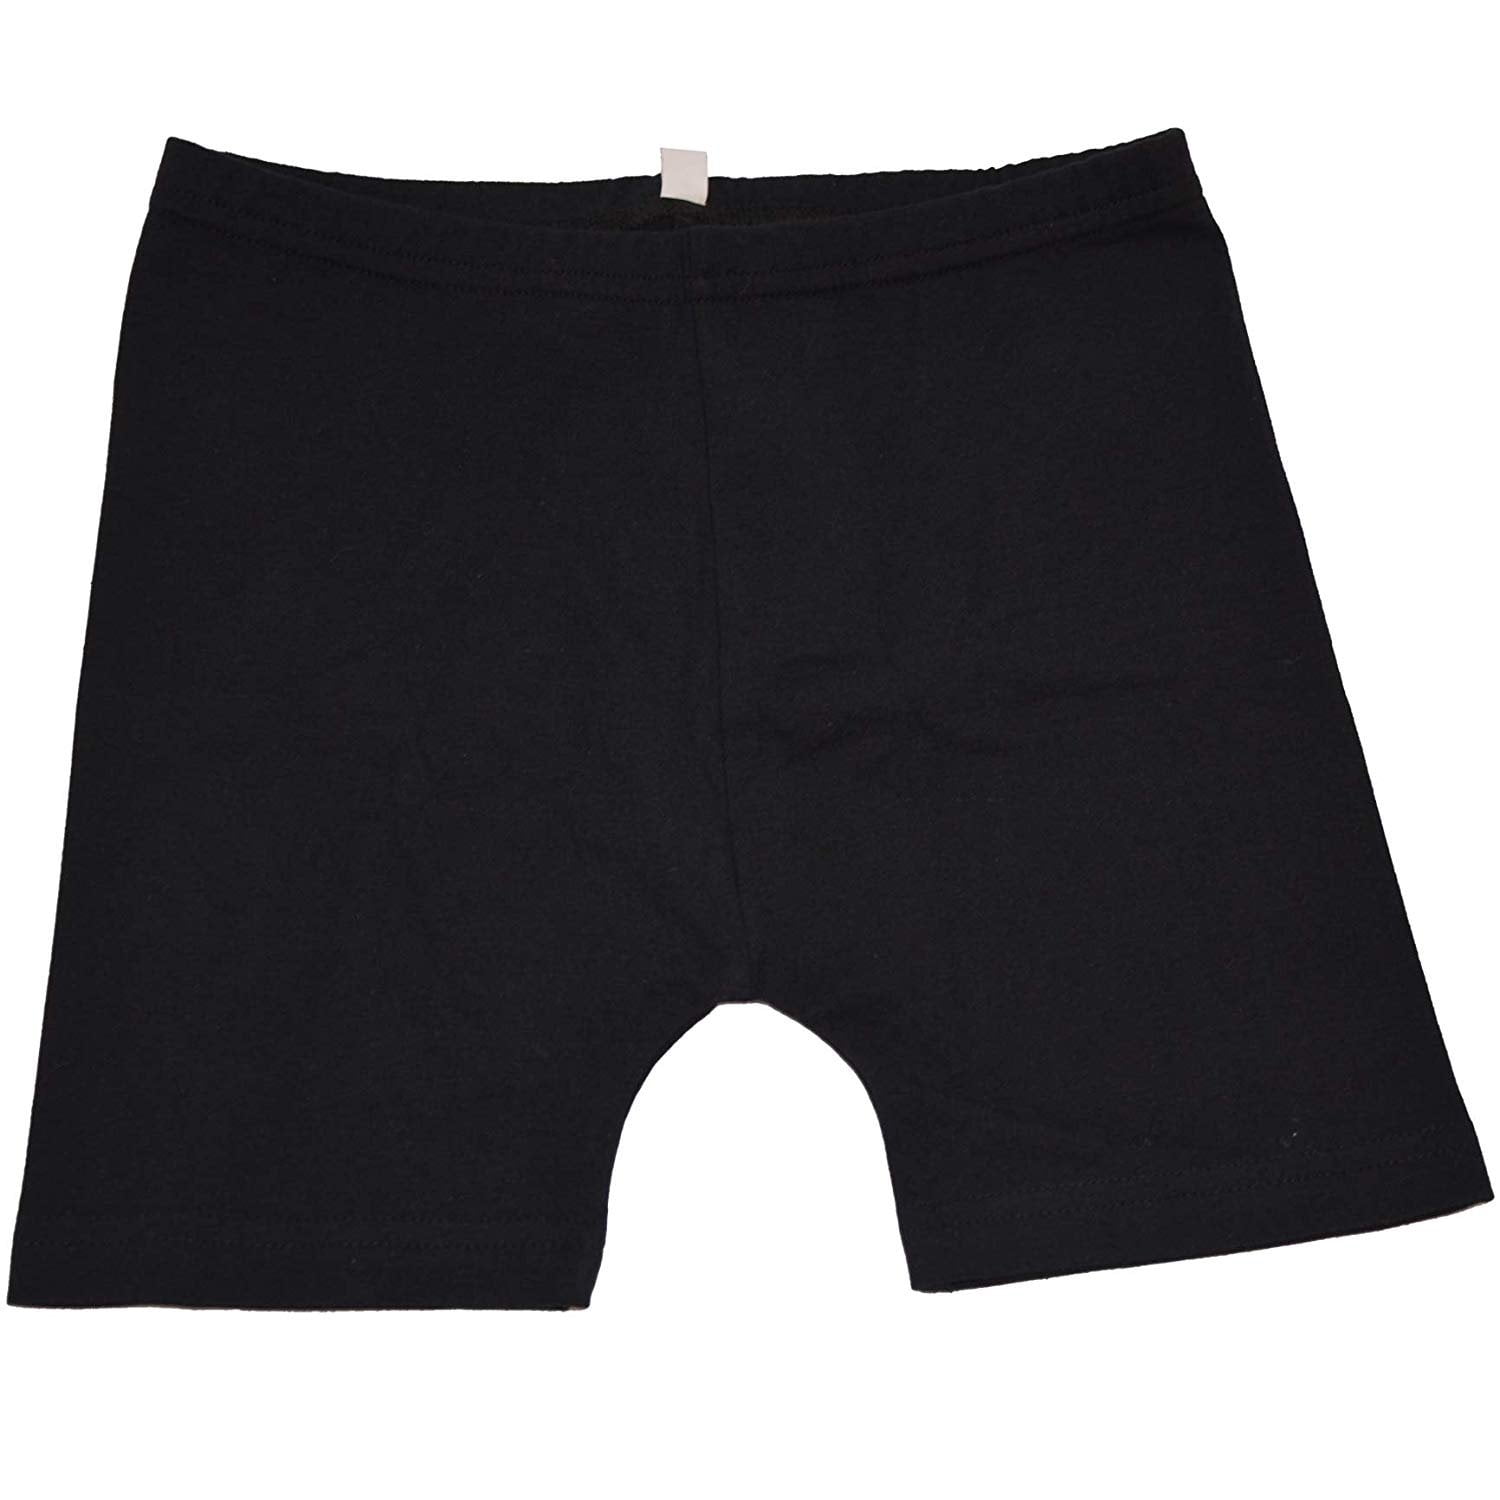 Details about   Unisex Gel Bike Bicycle Cycling Sport Shorts Underwear Casual Short Pants Bottom 